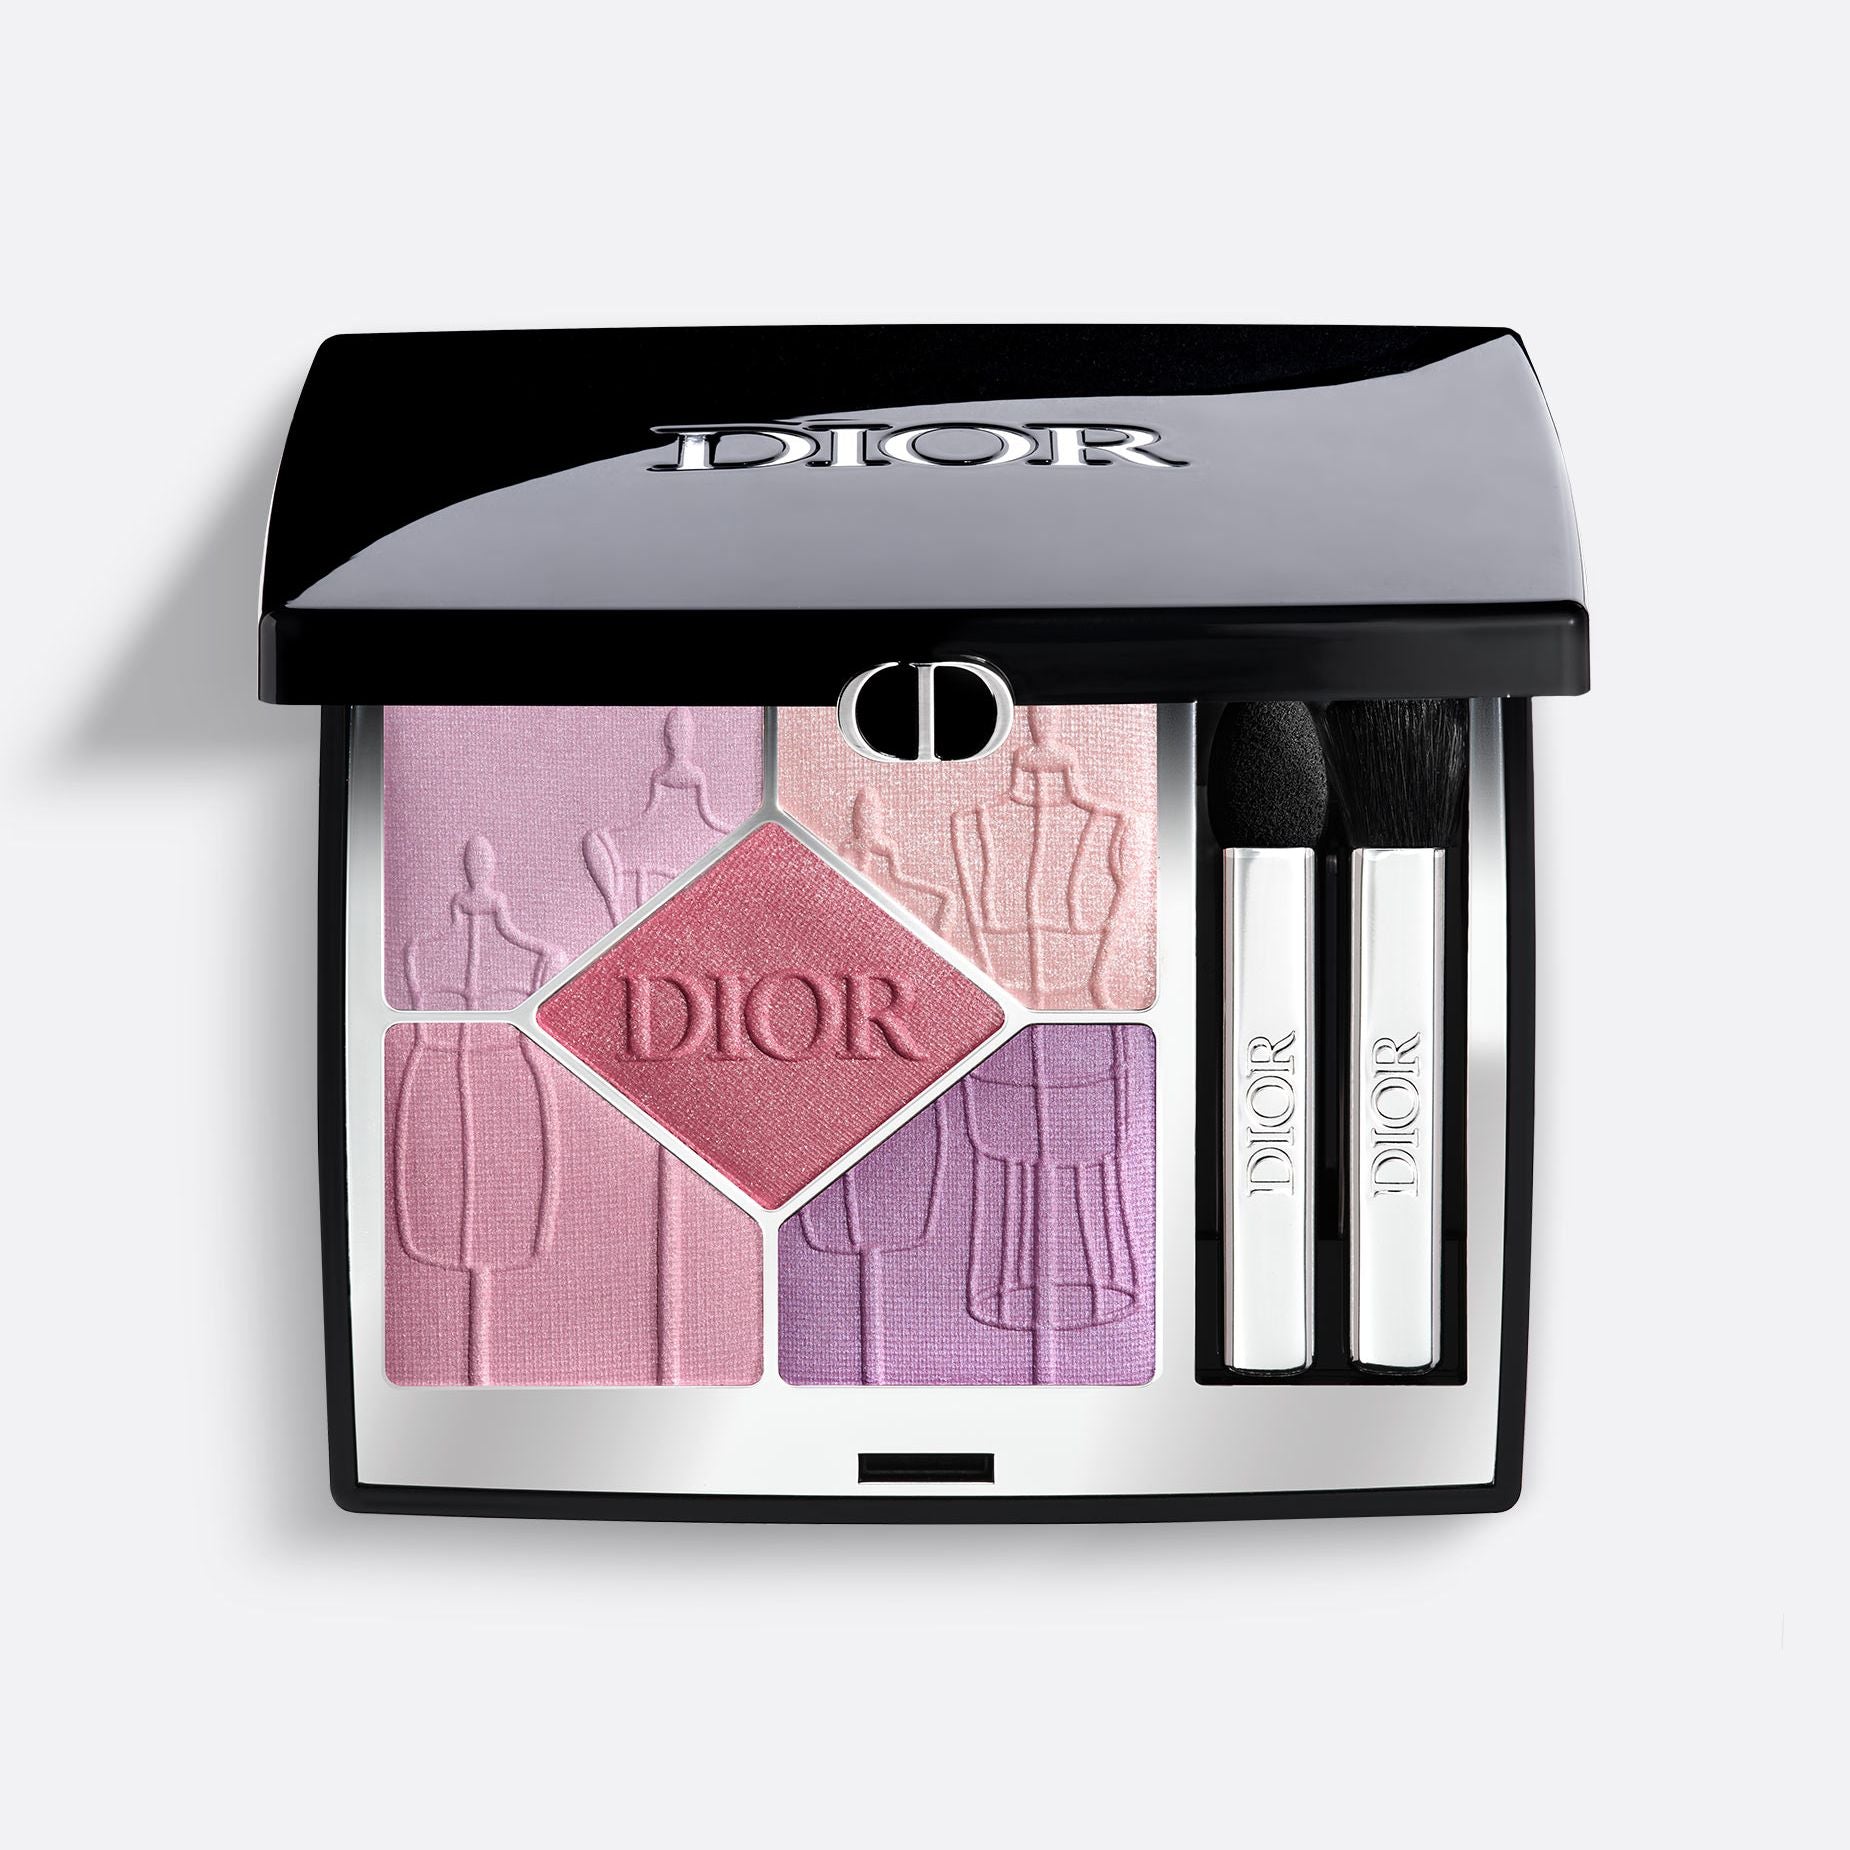 DIORSHOW 5 COULEURS - LIMITED EDITION ~ Eye Palette - 5 Eyeshadows - High Color and Long Wear